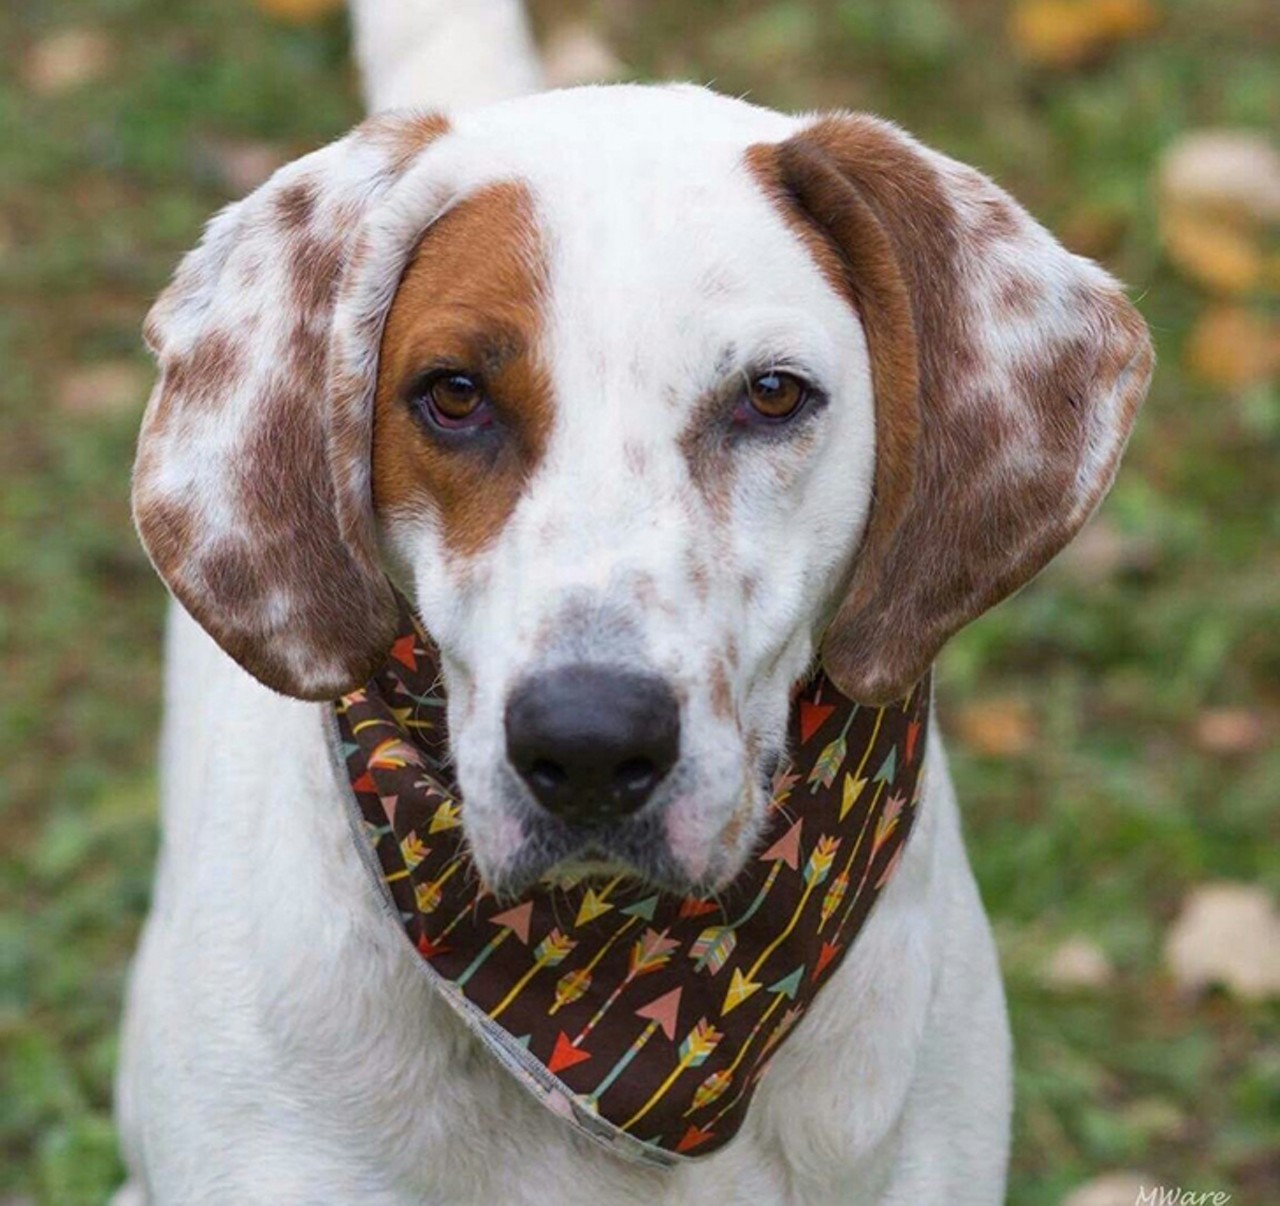 Copper
Age: 4 years old | Breed: Coonhound/English Setter | Sex: Male | Rescue: Louie&#146;s Legacy 
Photo via louieslegacy.org